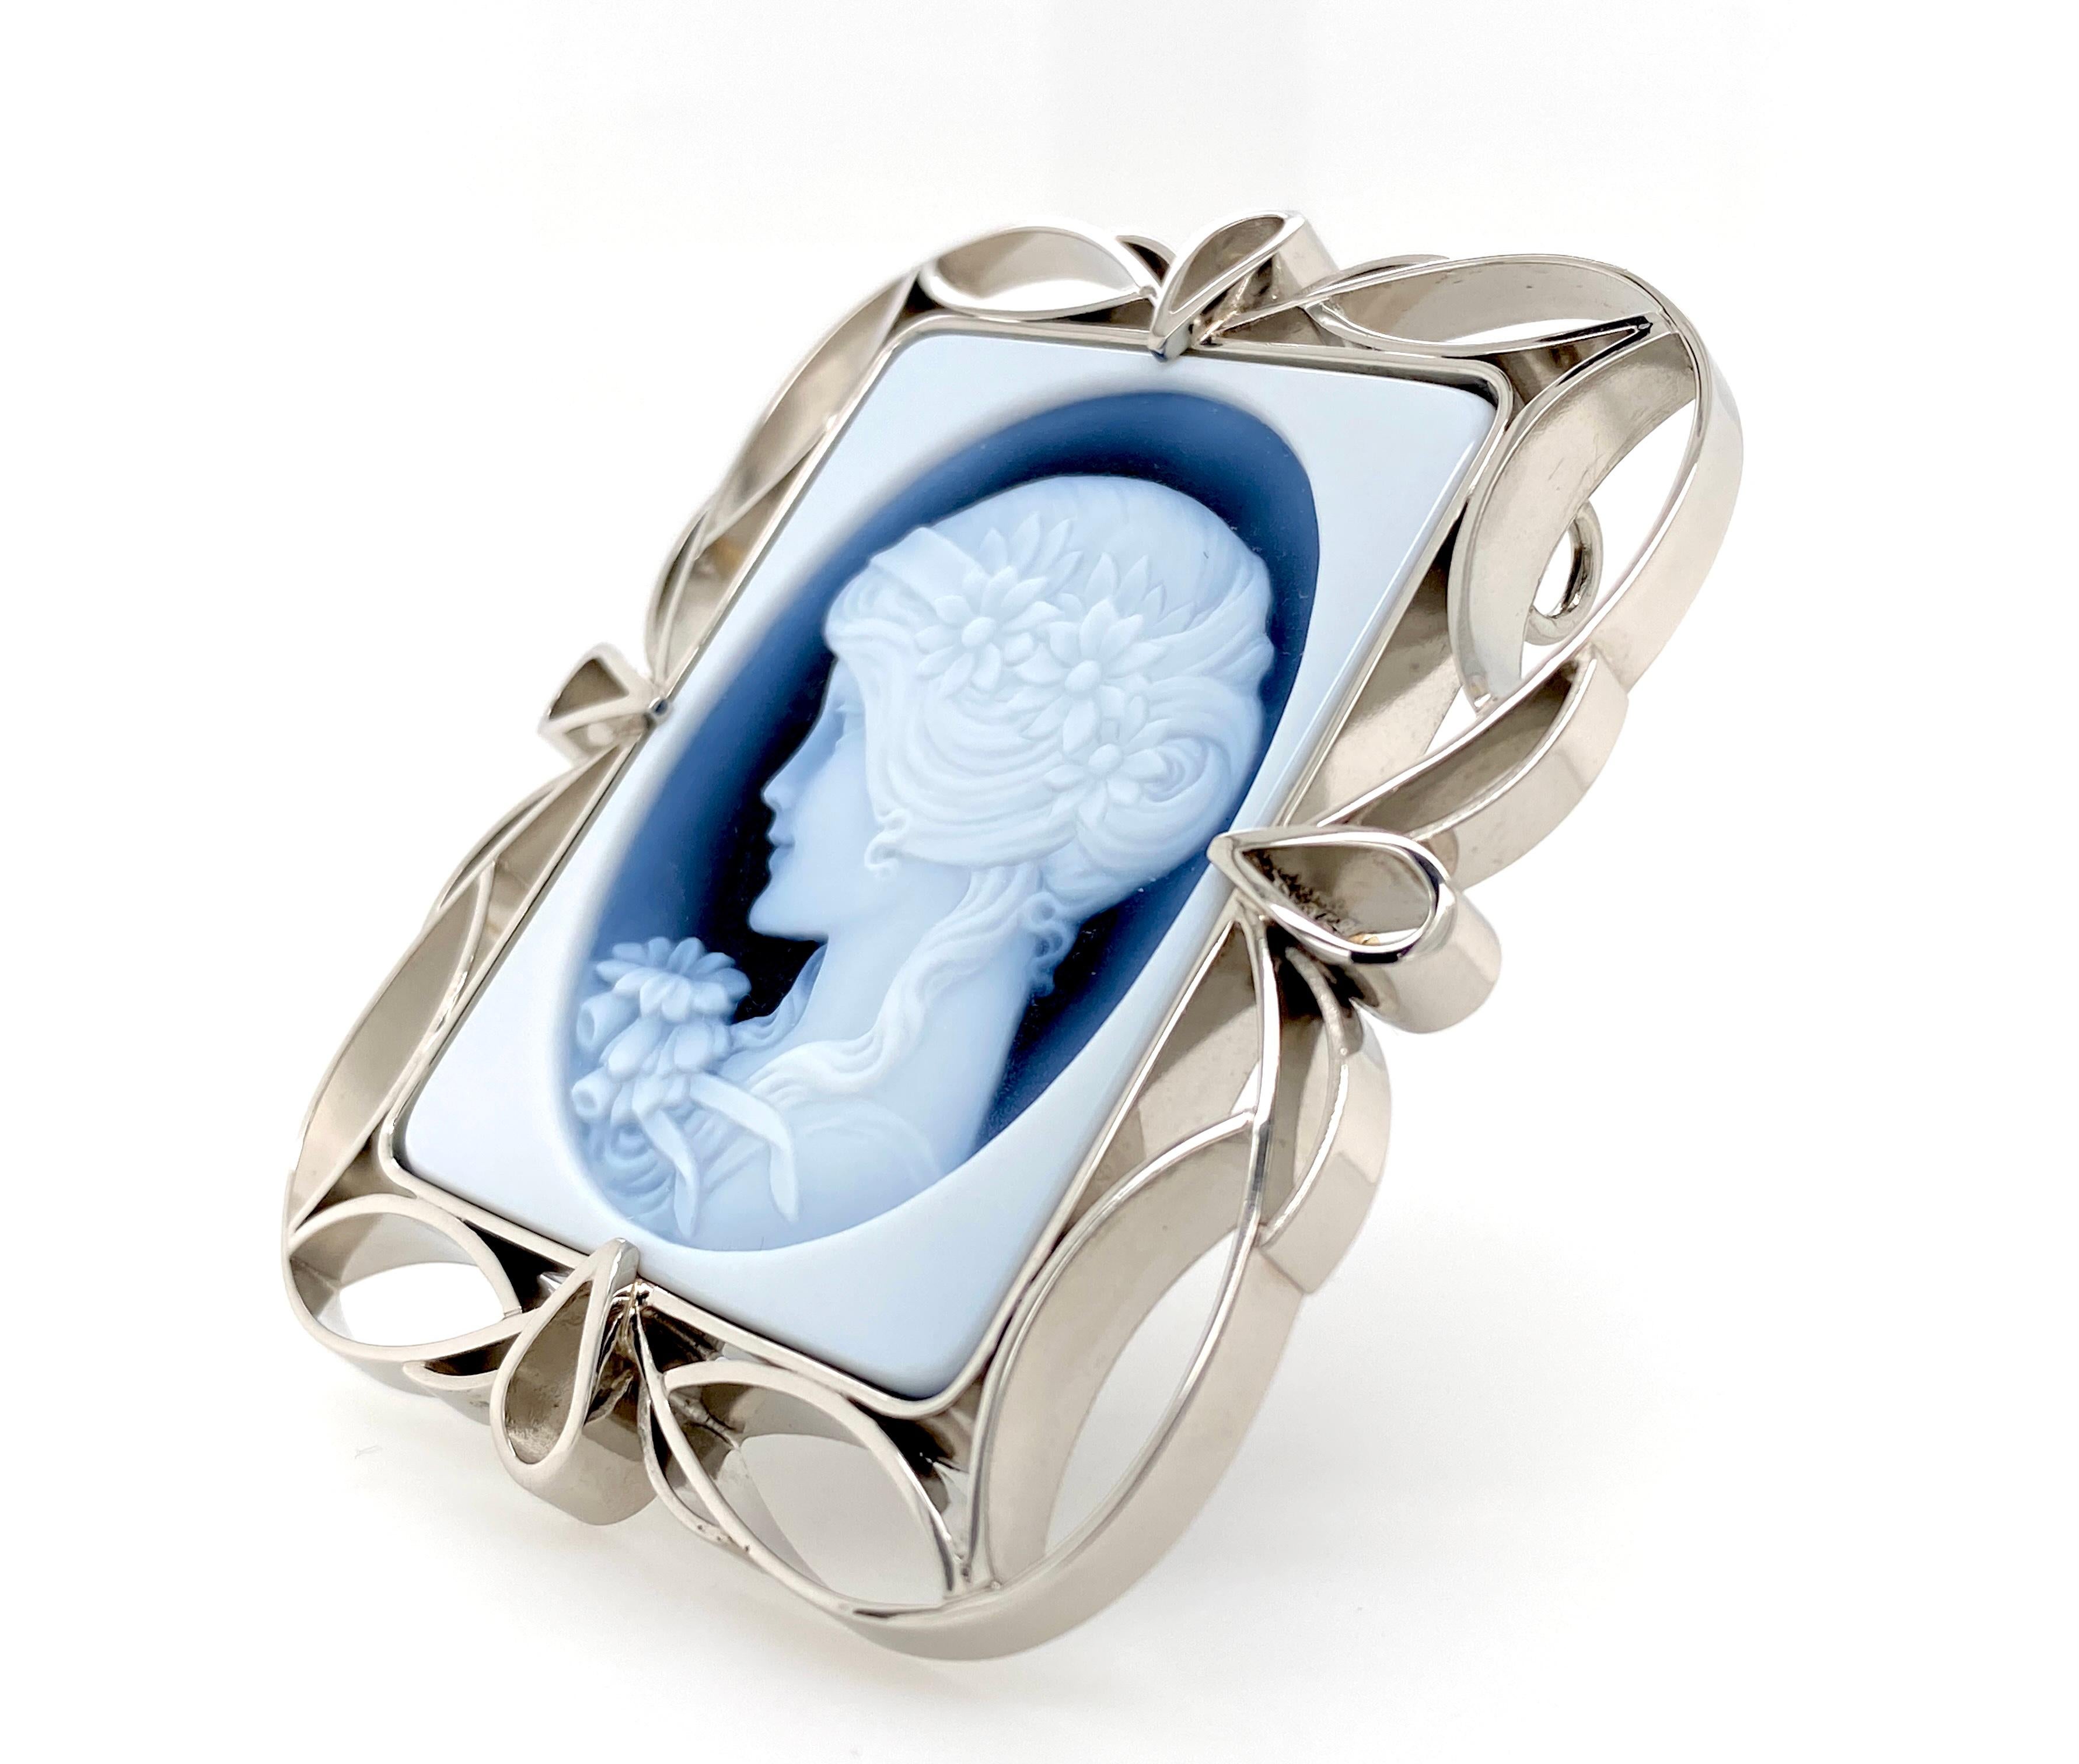 Flower Girl Creation.
At Creations Jewellers we are passionate about the craft of handmade jewellery in the modern world. This onyx (Brazilian agate layer) Cameo was hand carved in 1980 and sourced from the Roth family famous in Germany for their